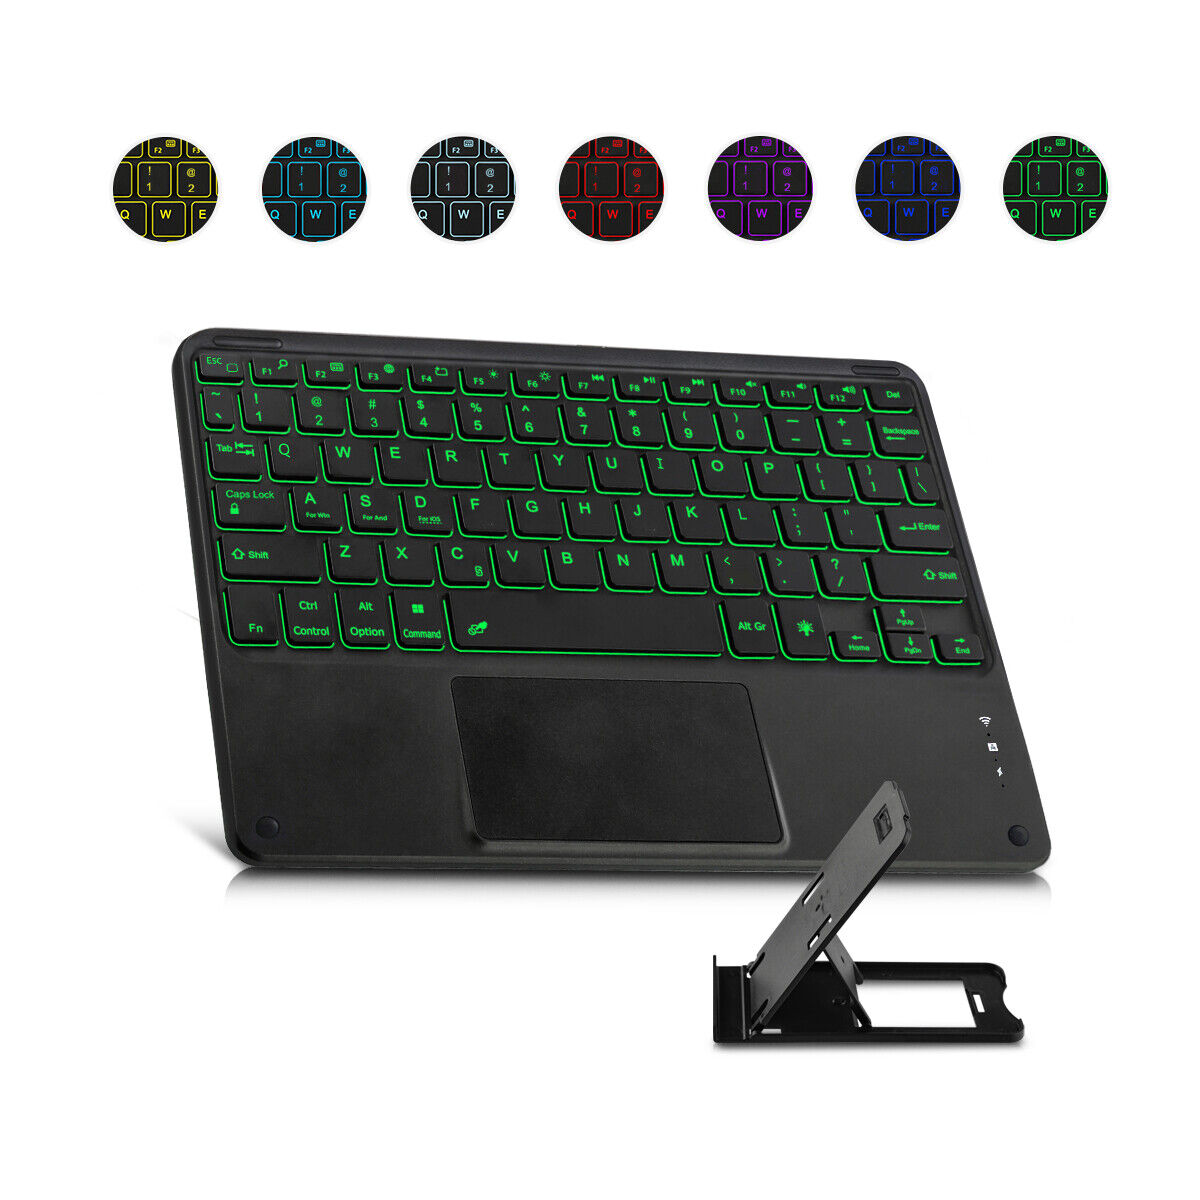 Wireless Bluetooth Backlit Keyboard Trackpad for Android tablet/Windows tablet